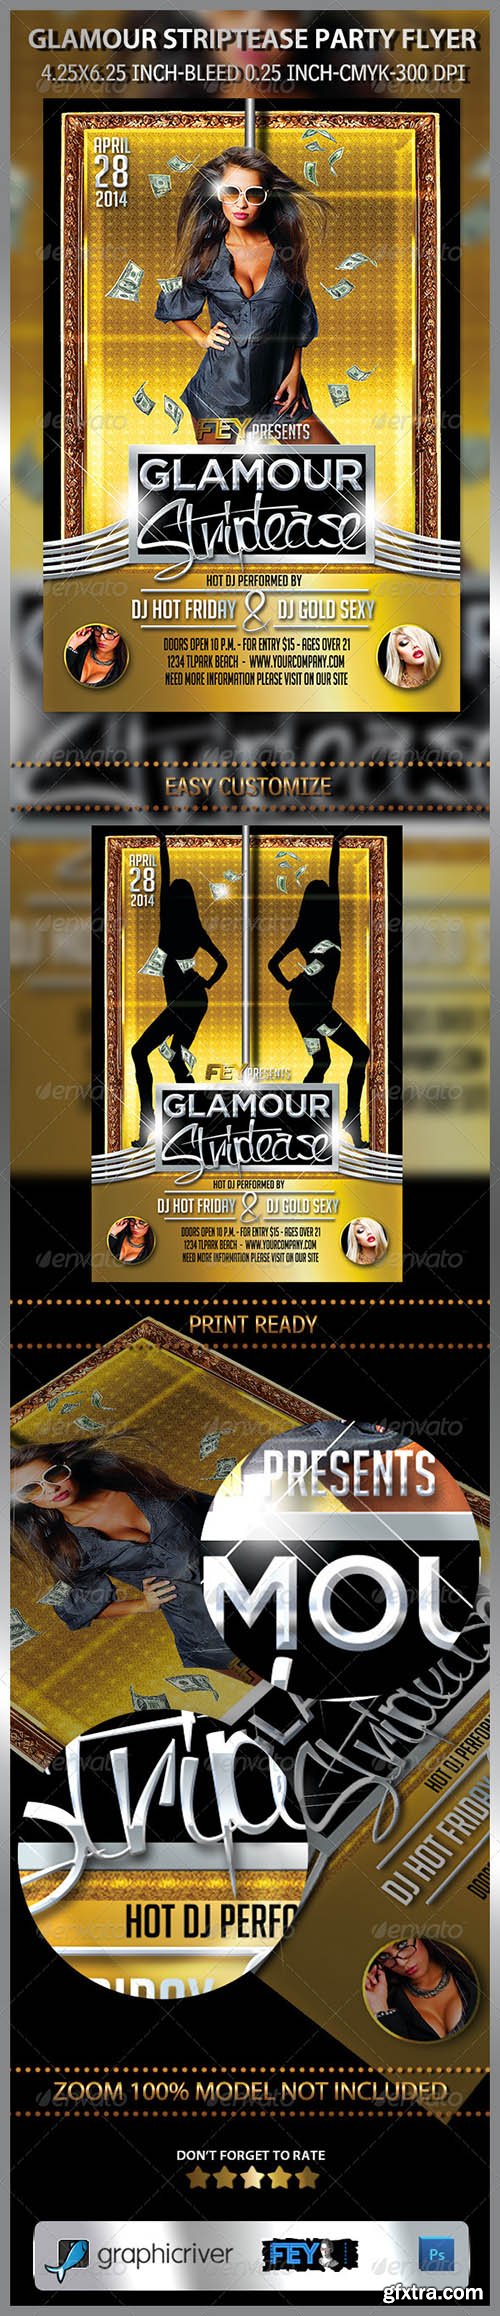 Graphicriver Glamour Striptease Party Flyer 7533550